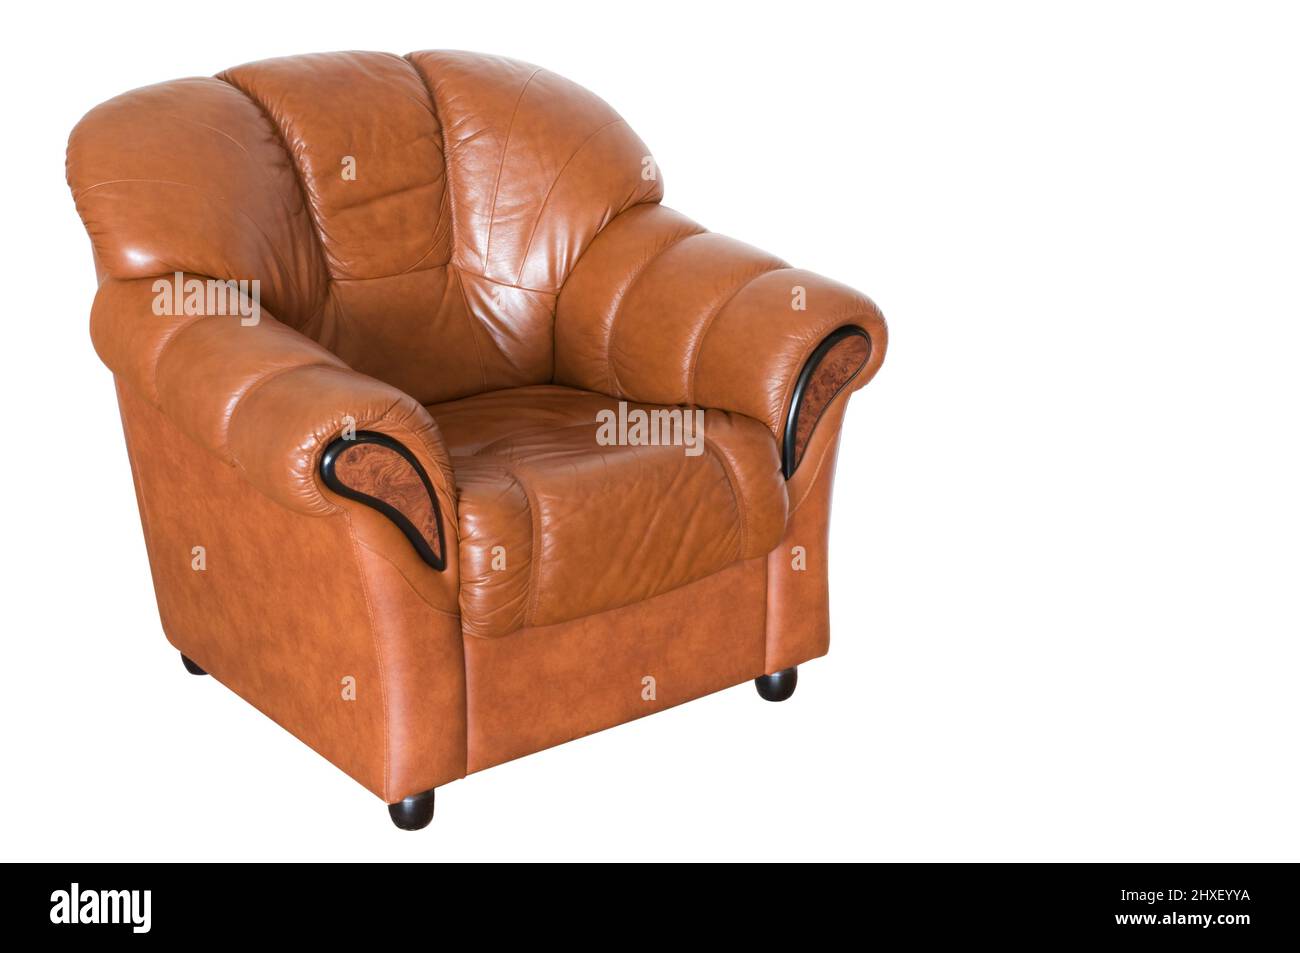 Leather armchair isolated on white background Stock Photo